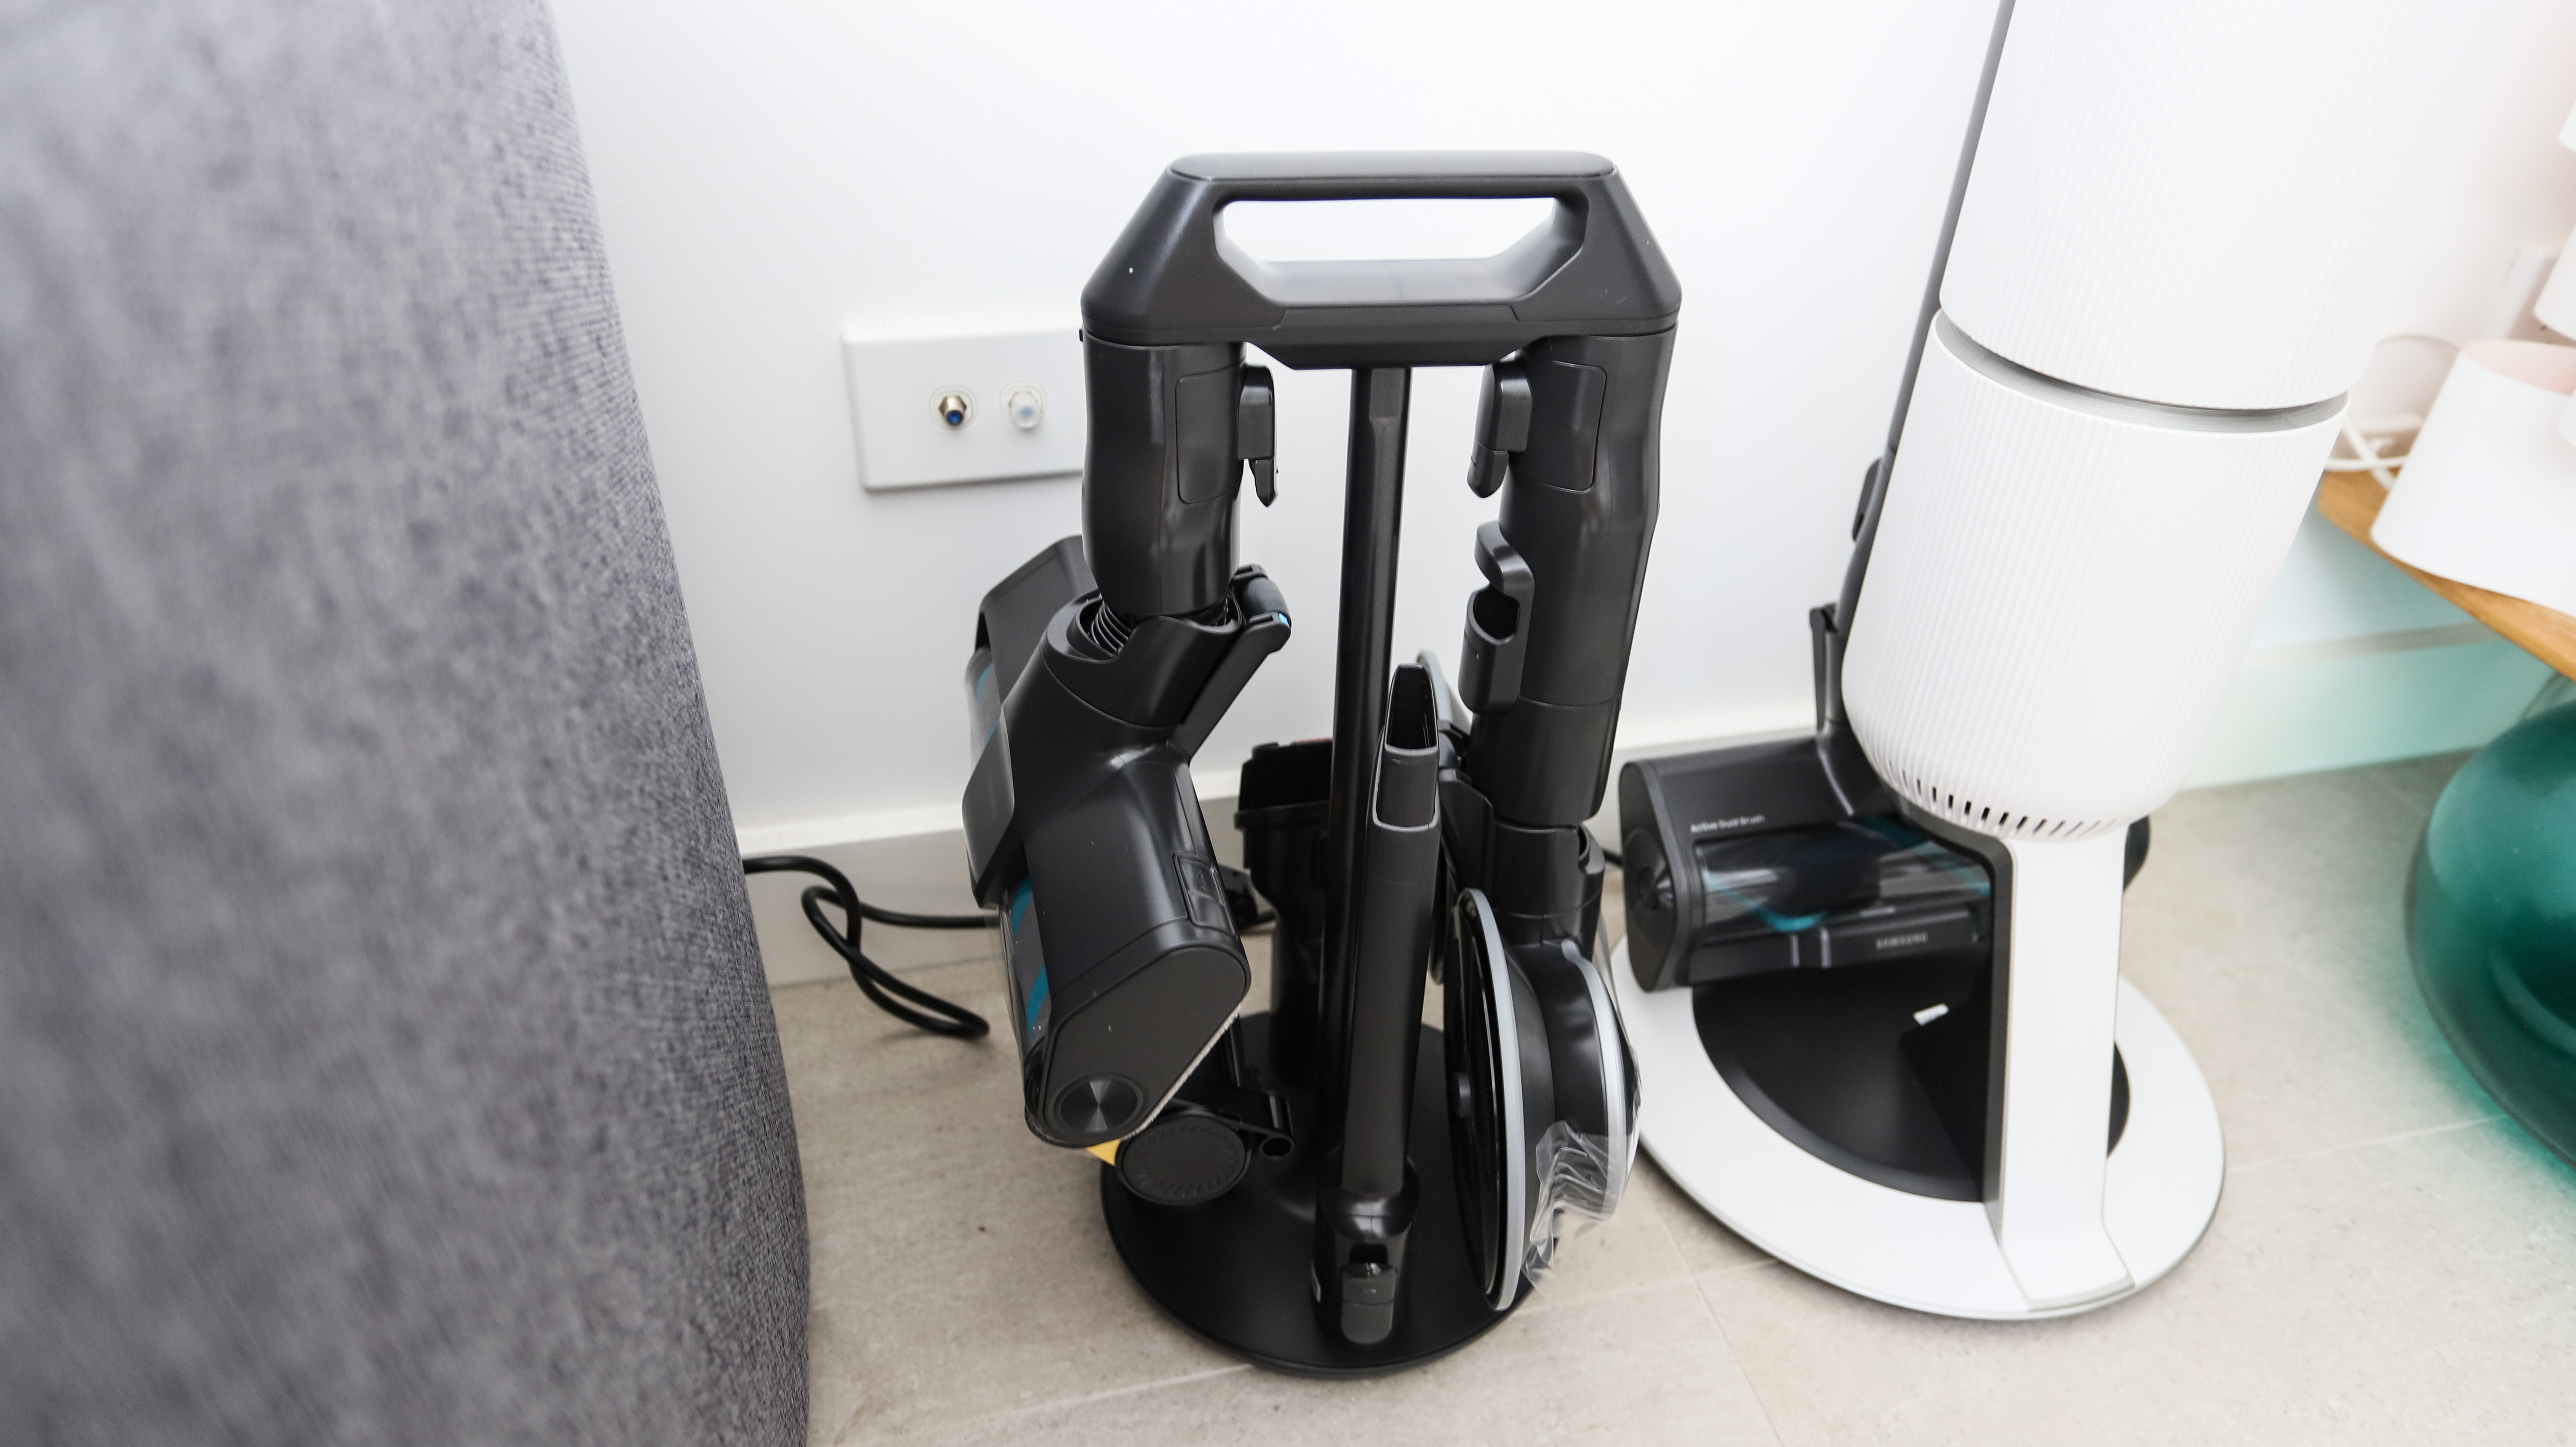 Samsung Bespoke Jet AI's Accessory Cradle with tools